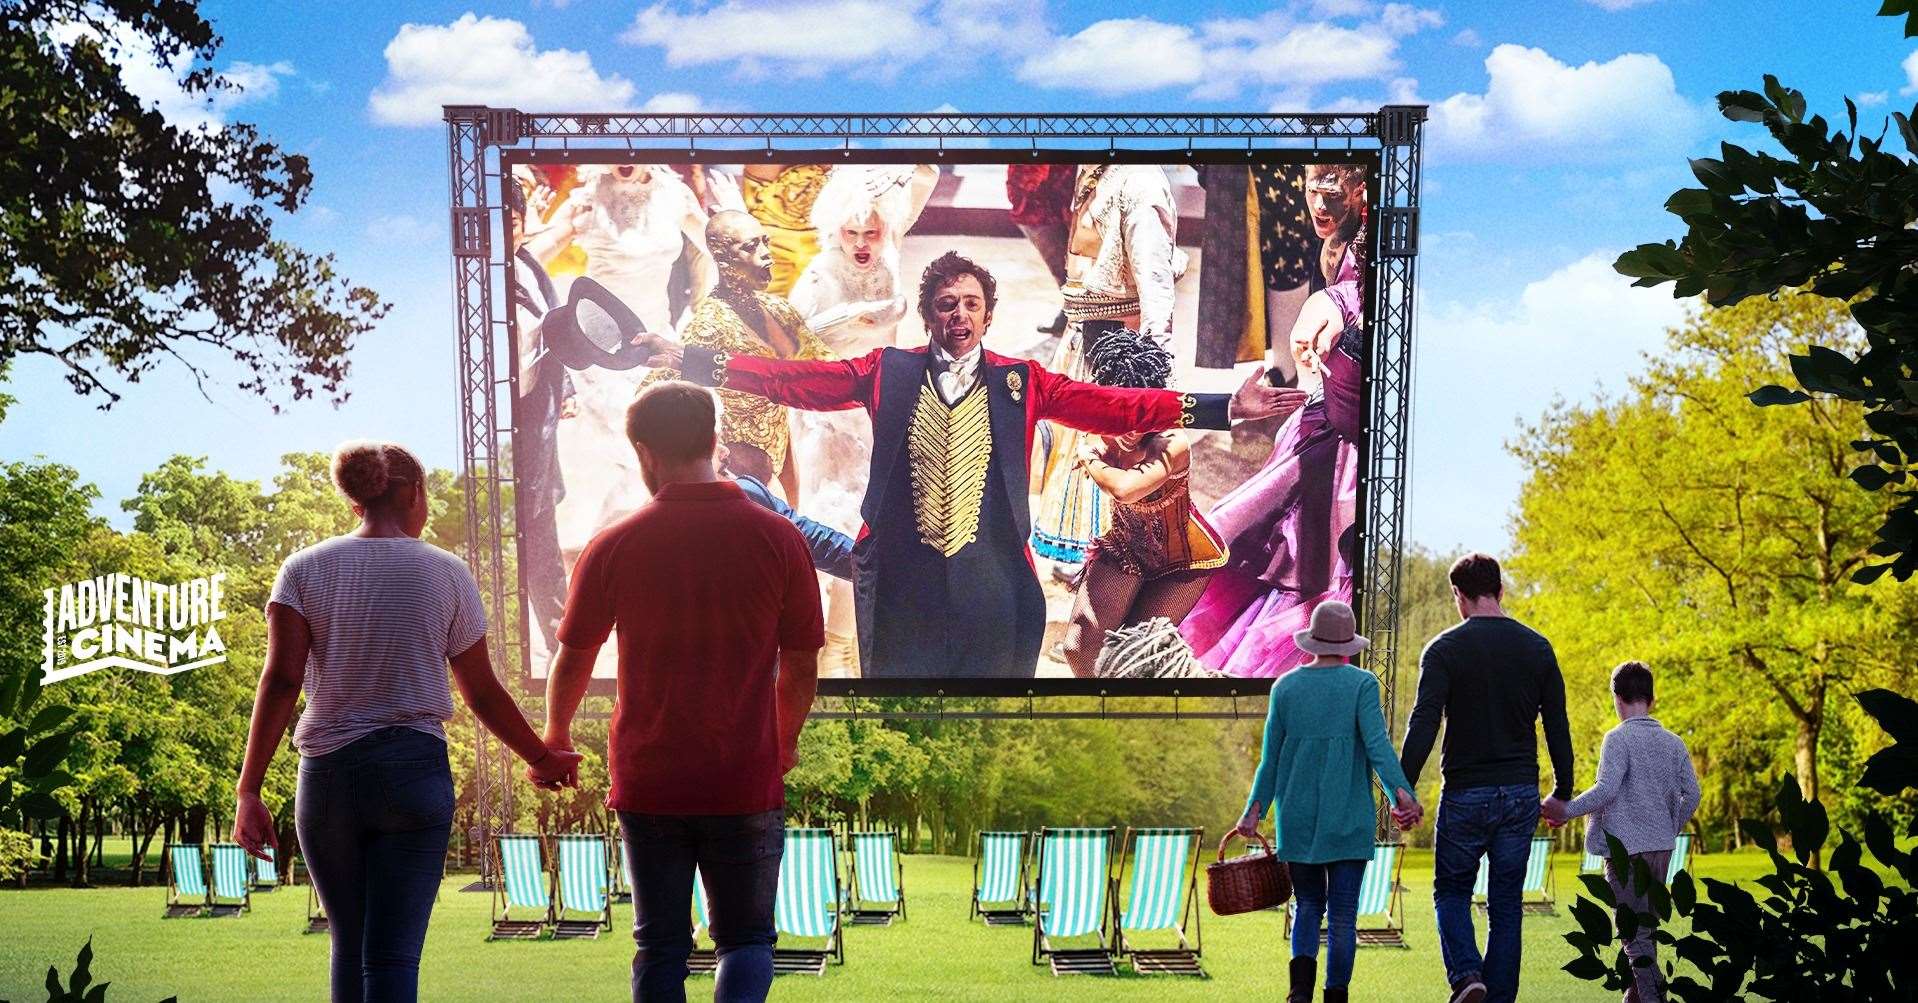 Adventure Cinema will be showing The Greatest Showman singalong